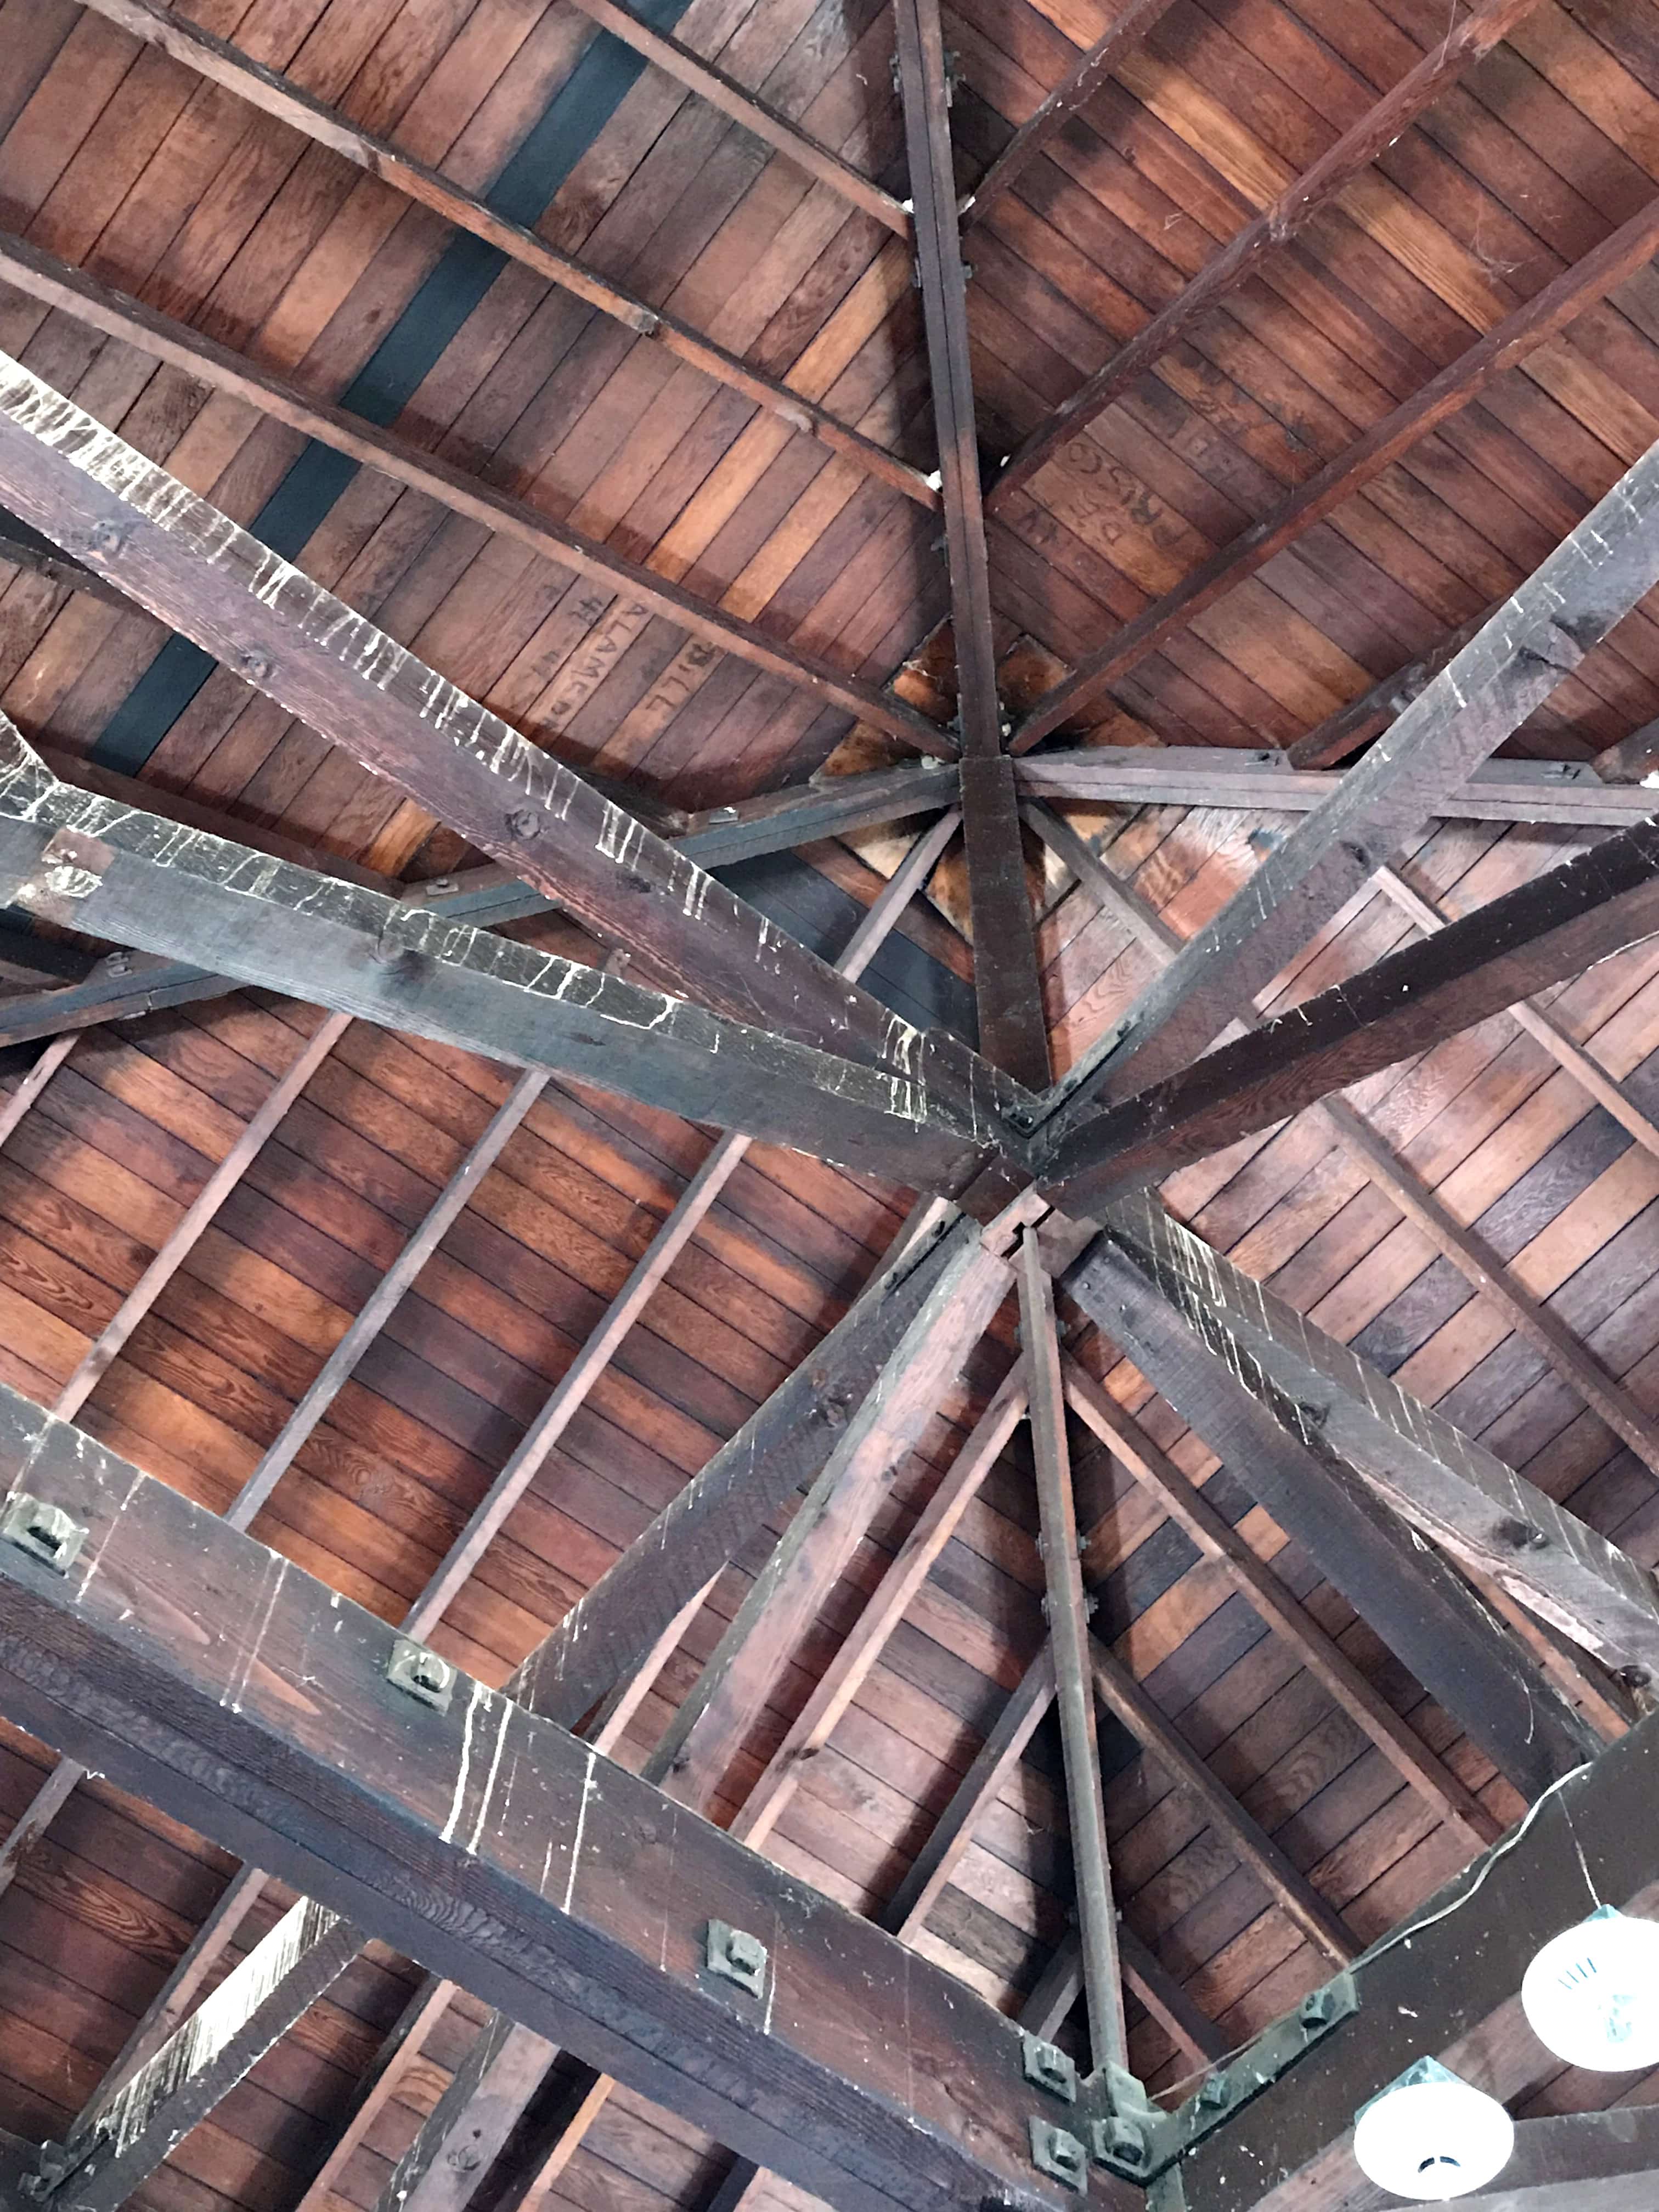 wooden ceiling and beams with names carved into them